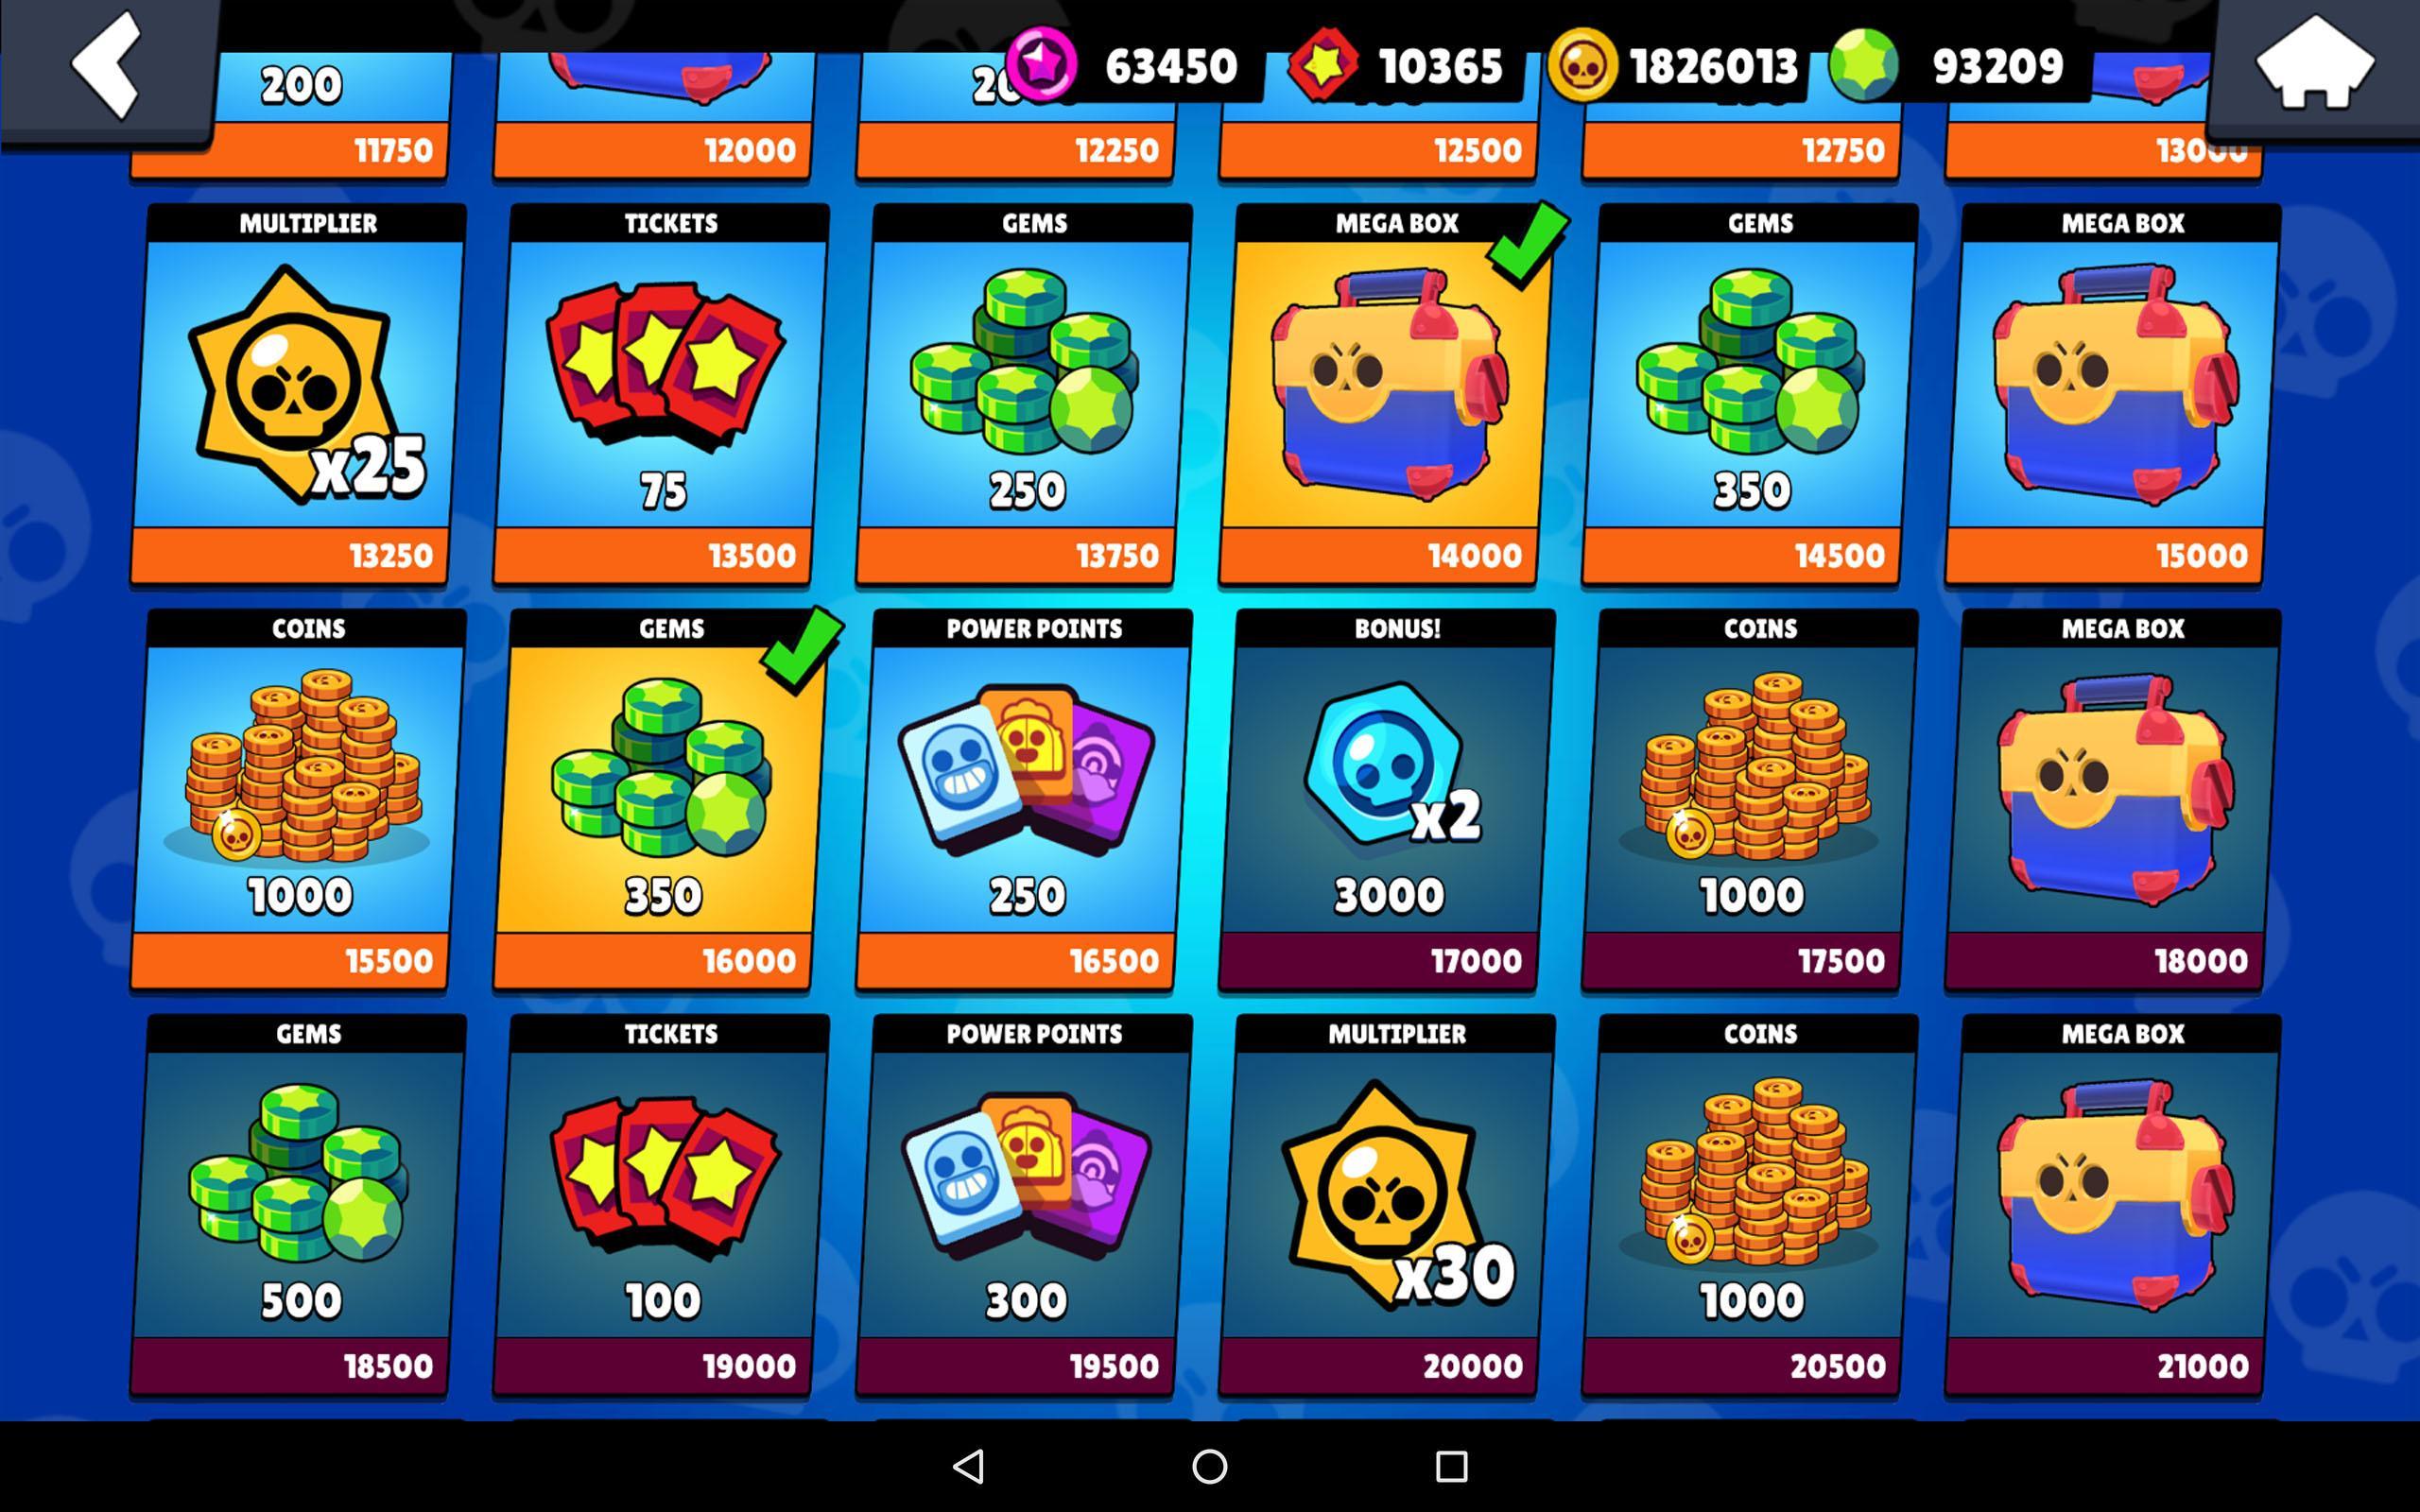 box-simulator-for-brawl-stars-apk-for-android-download